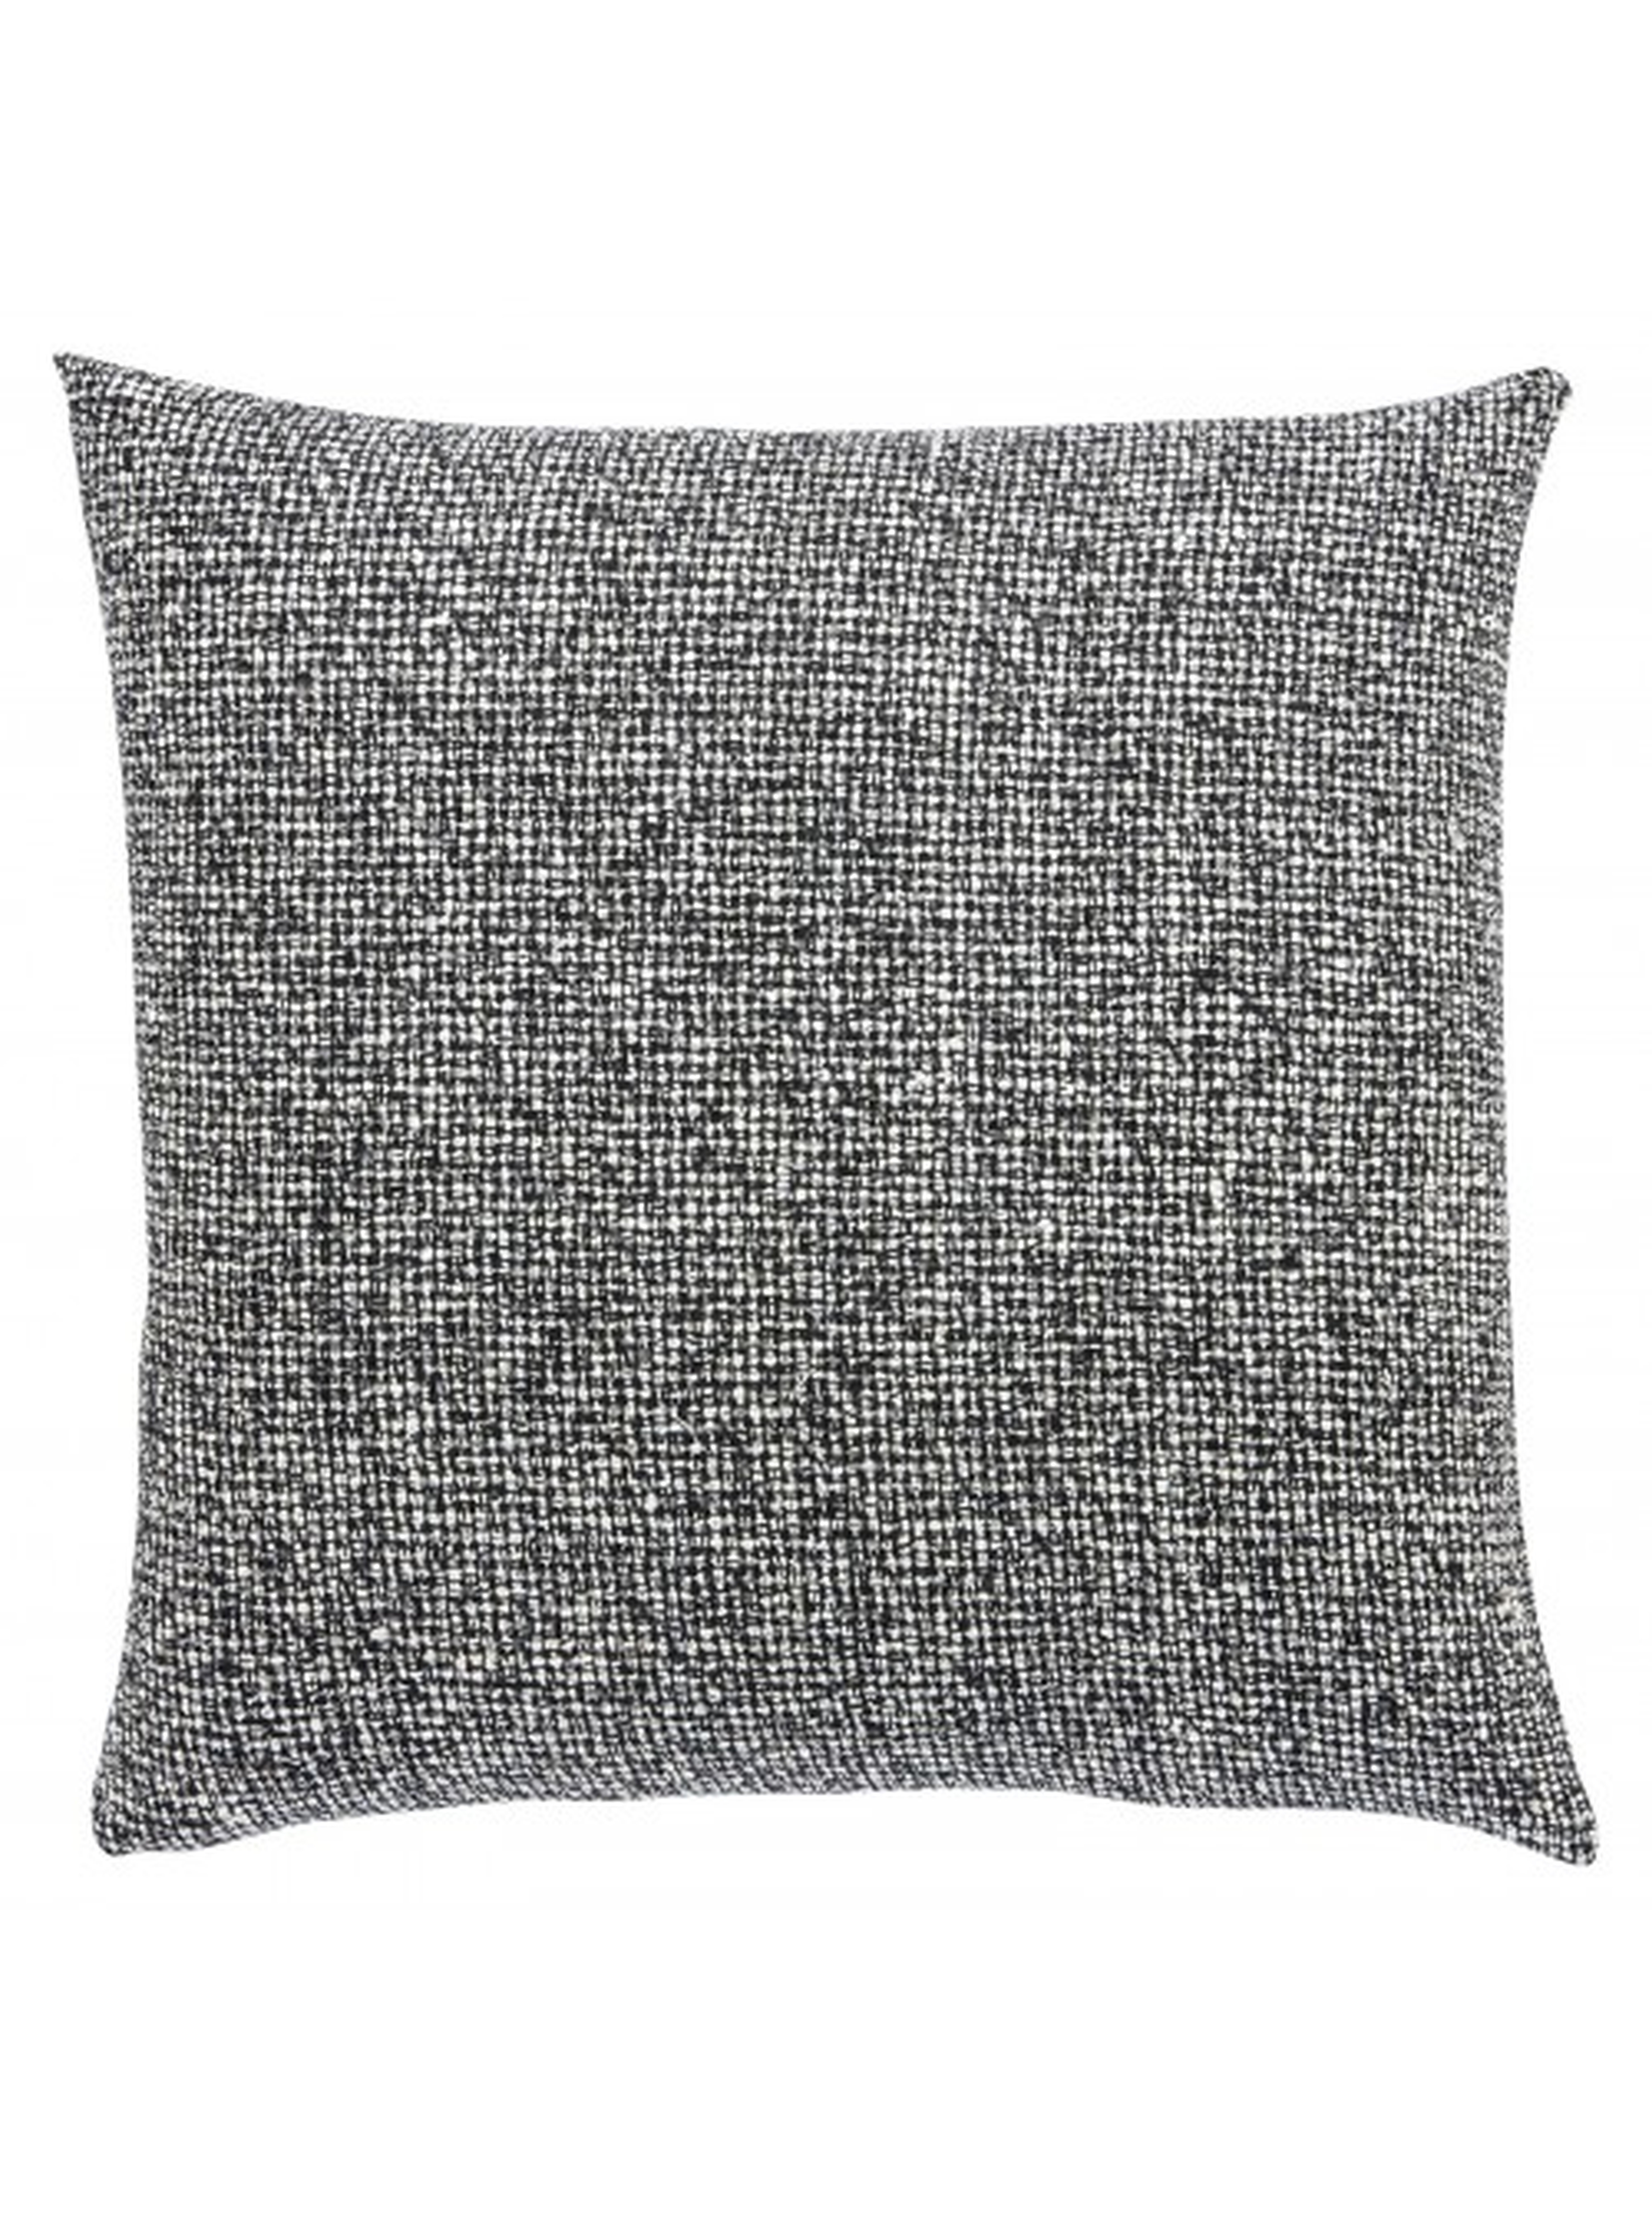 CARALYN PILLOW, BLACK - Down Filled - Lulu and Georgia